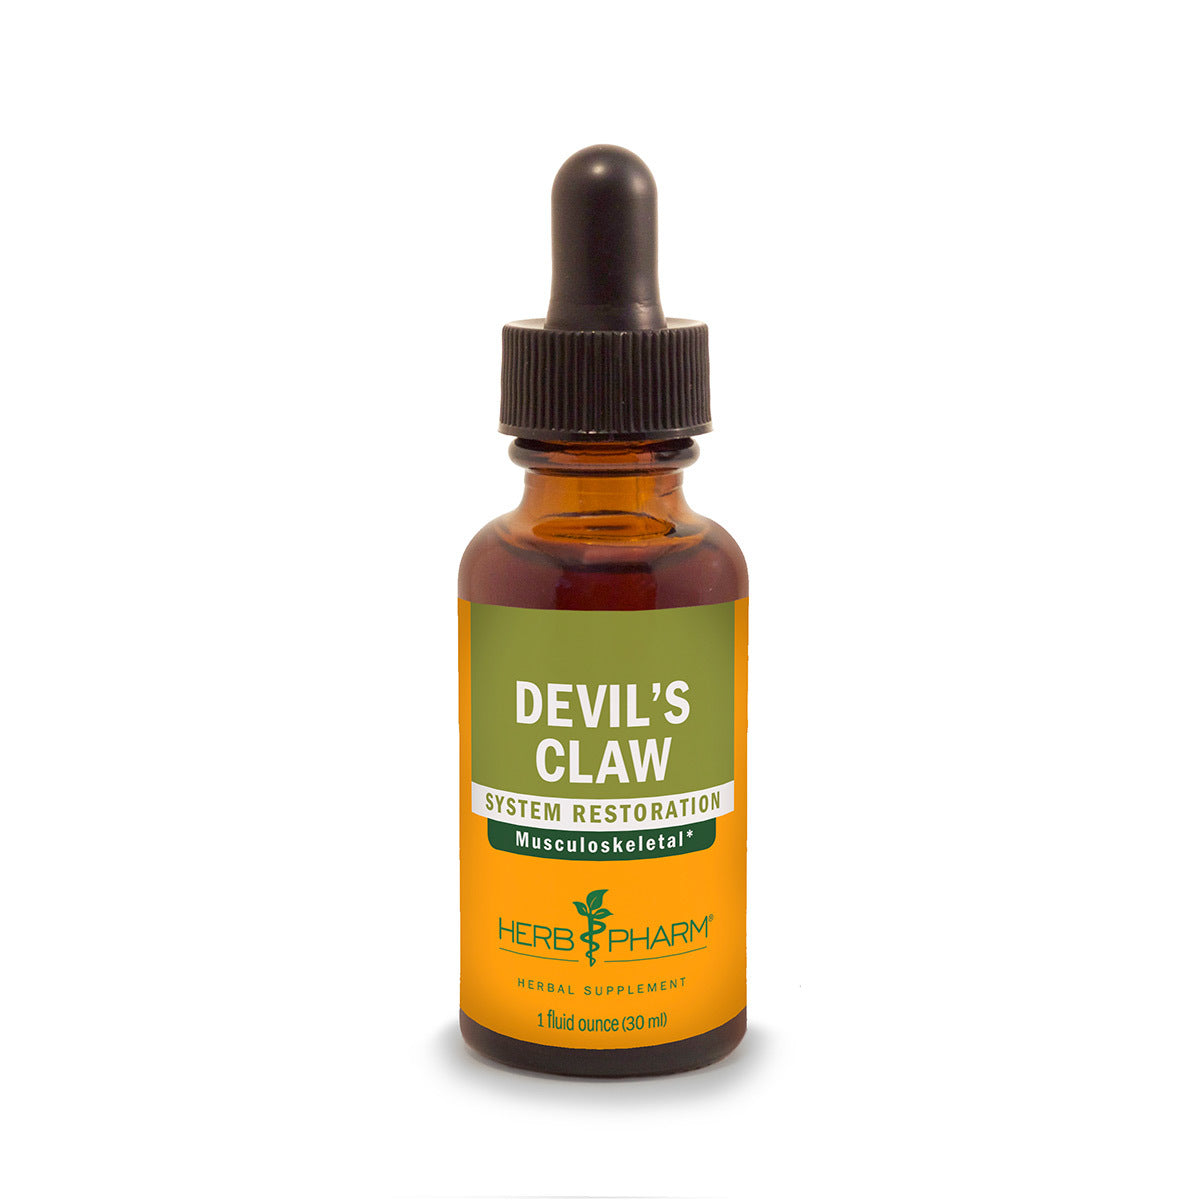 Primary image of Devil's Claw Extract